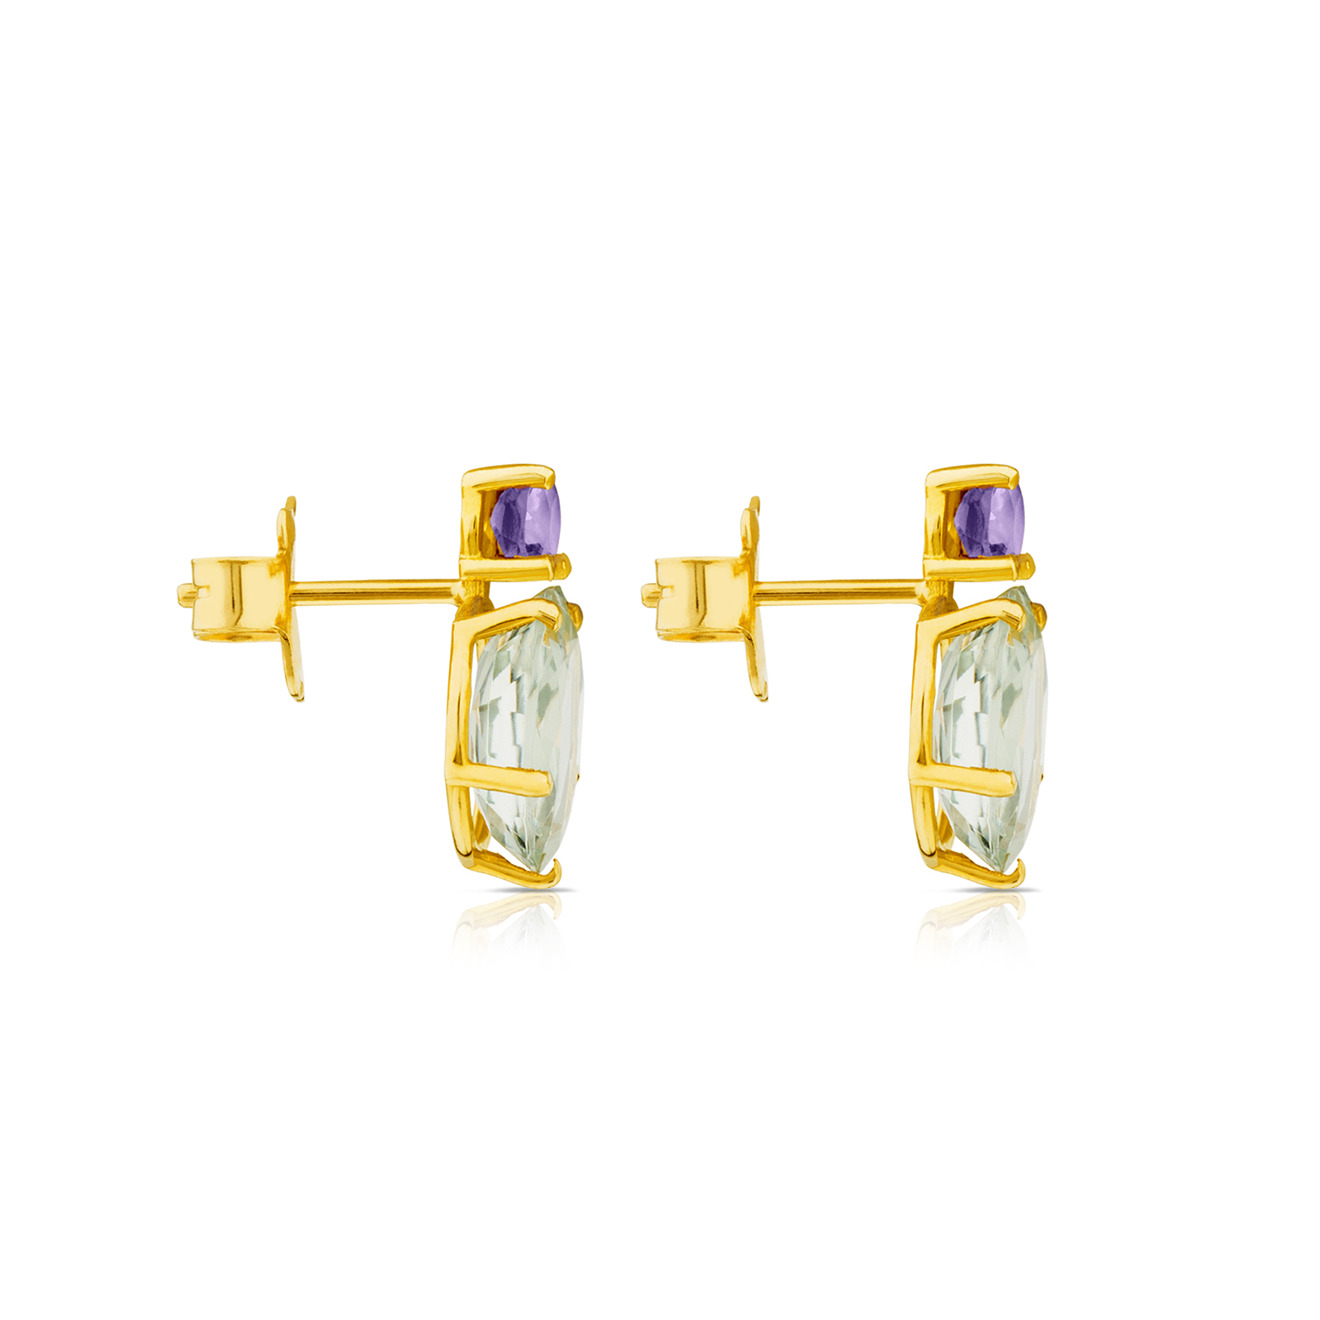 Ivette earrings in yellow gold with praseolite and amethyst – buy at Poison  Drop online store, SKU